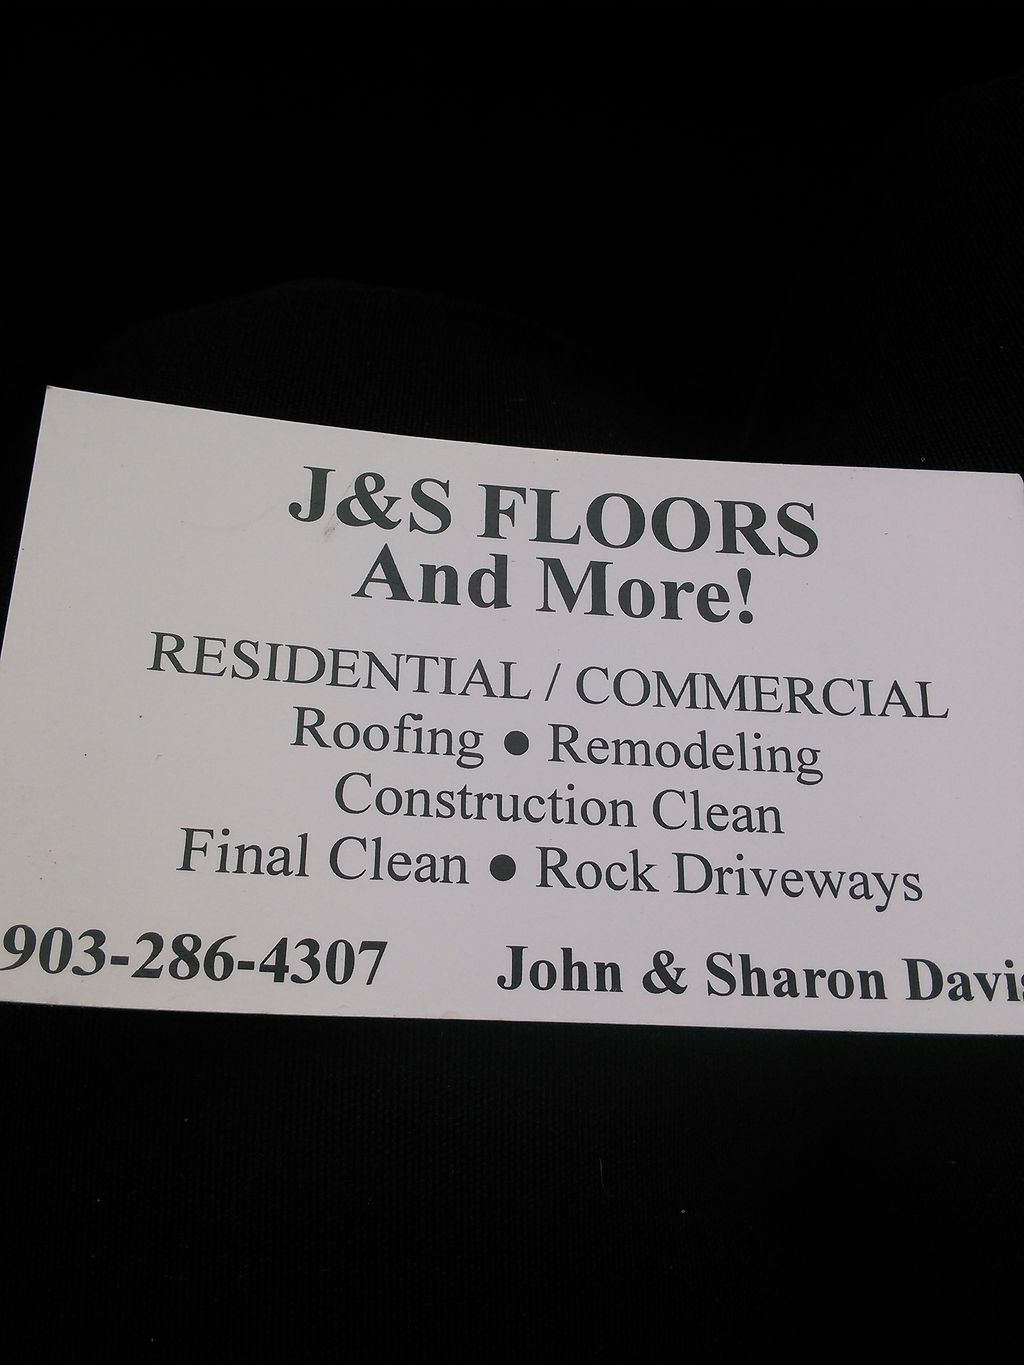 Jns floors and more